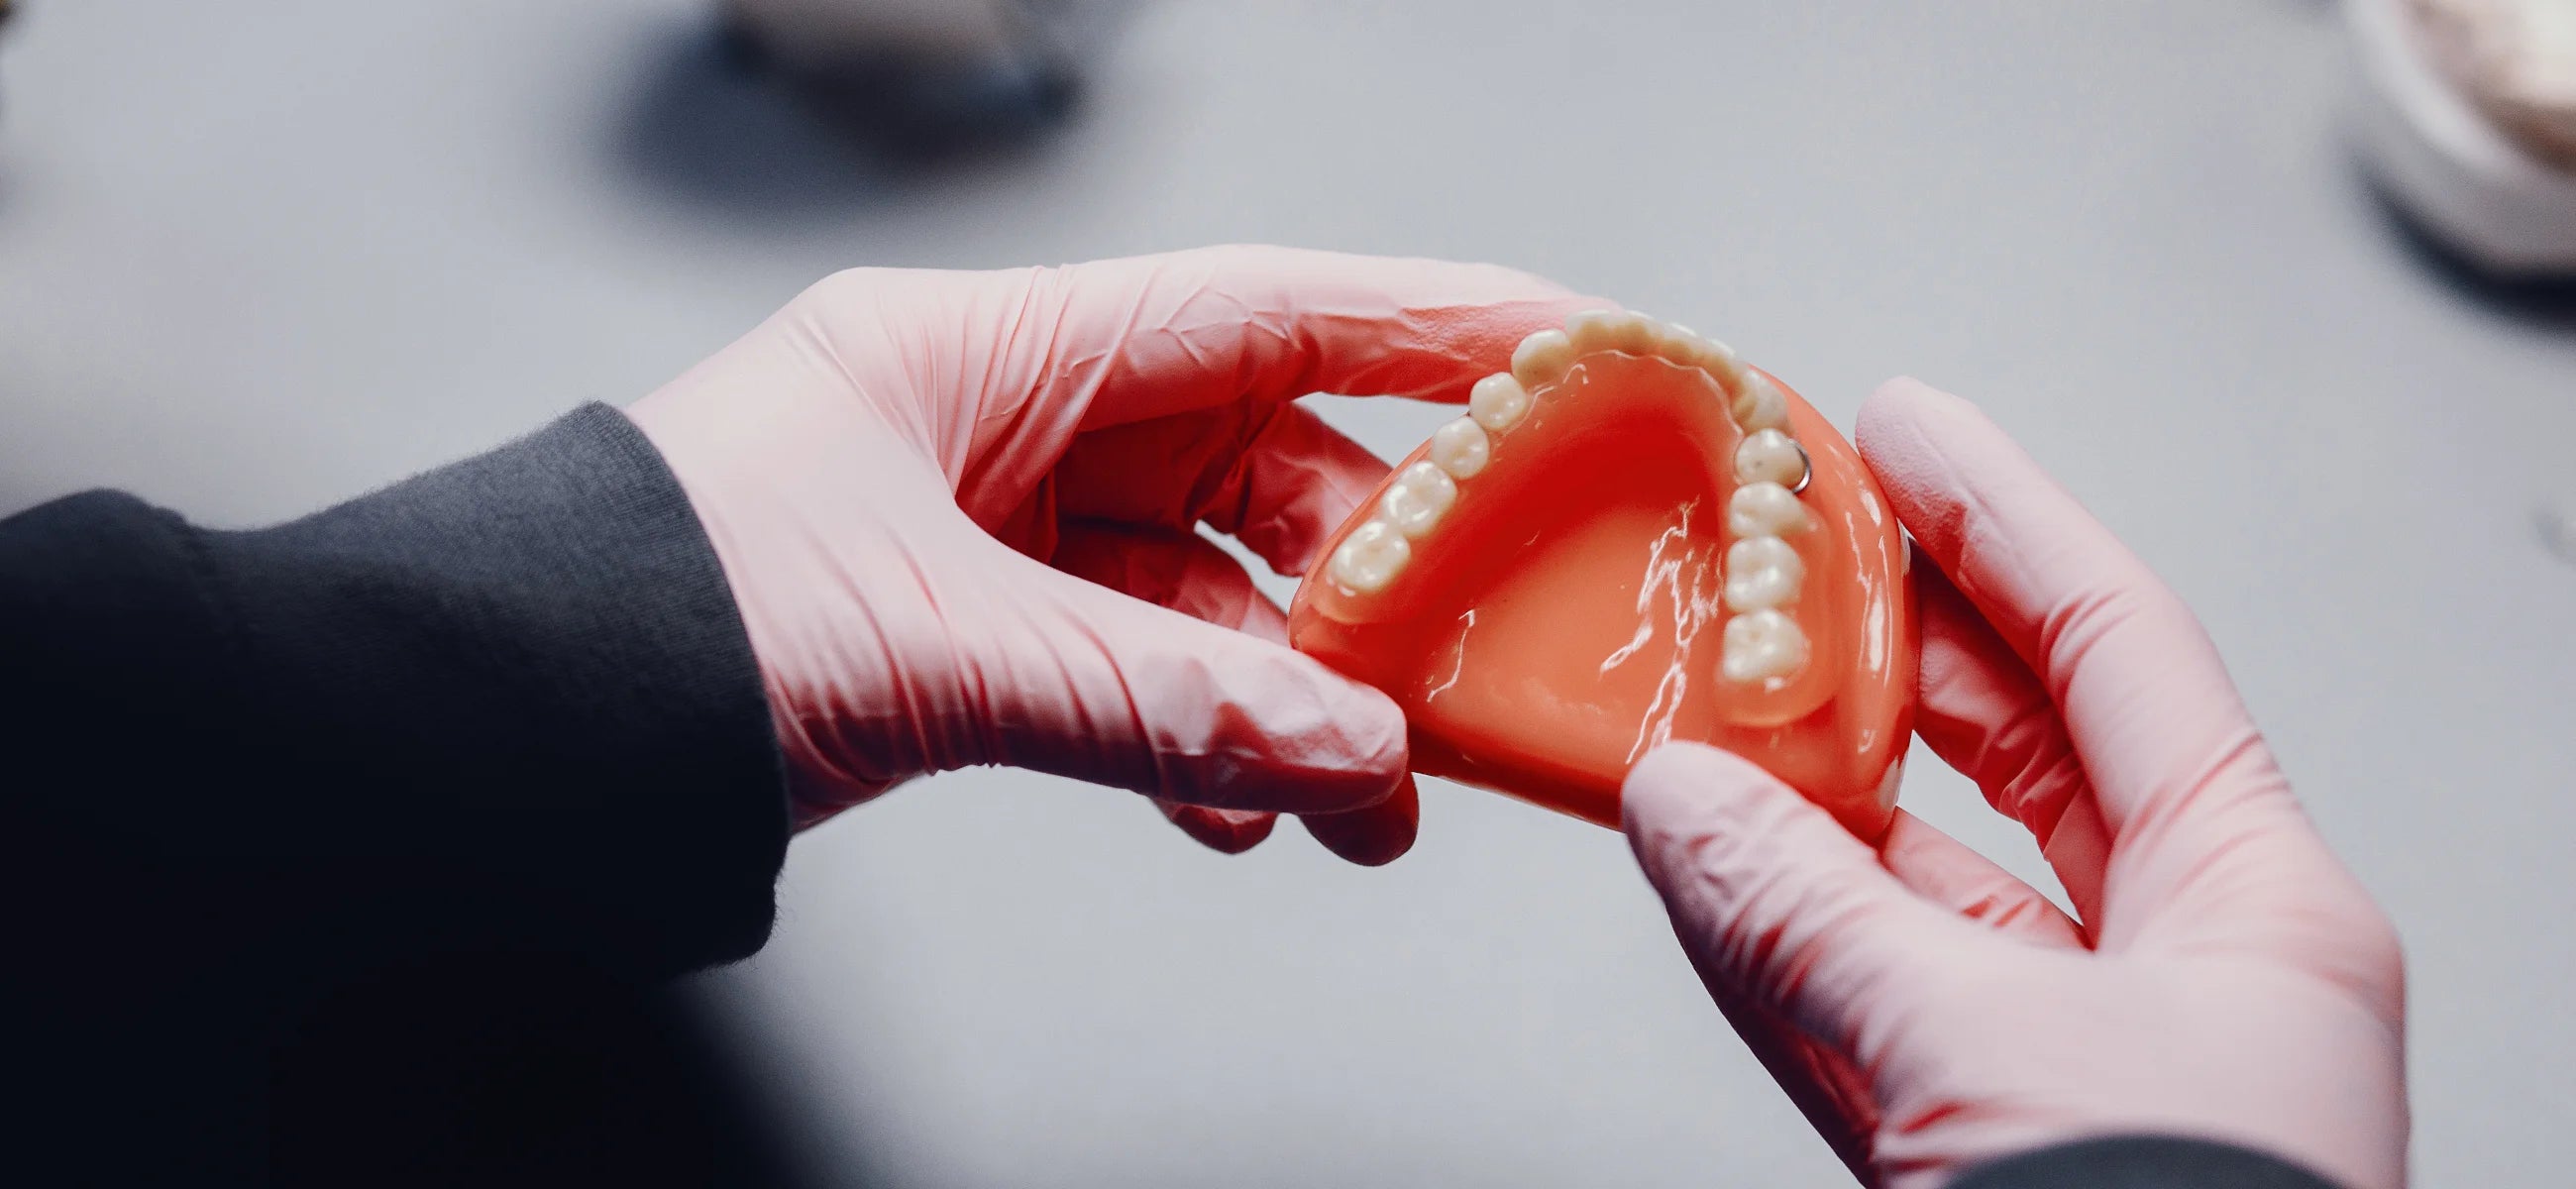 Everything you need to know about the tooth implant procedure